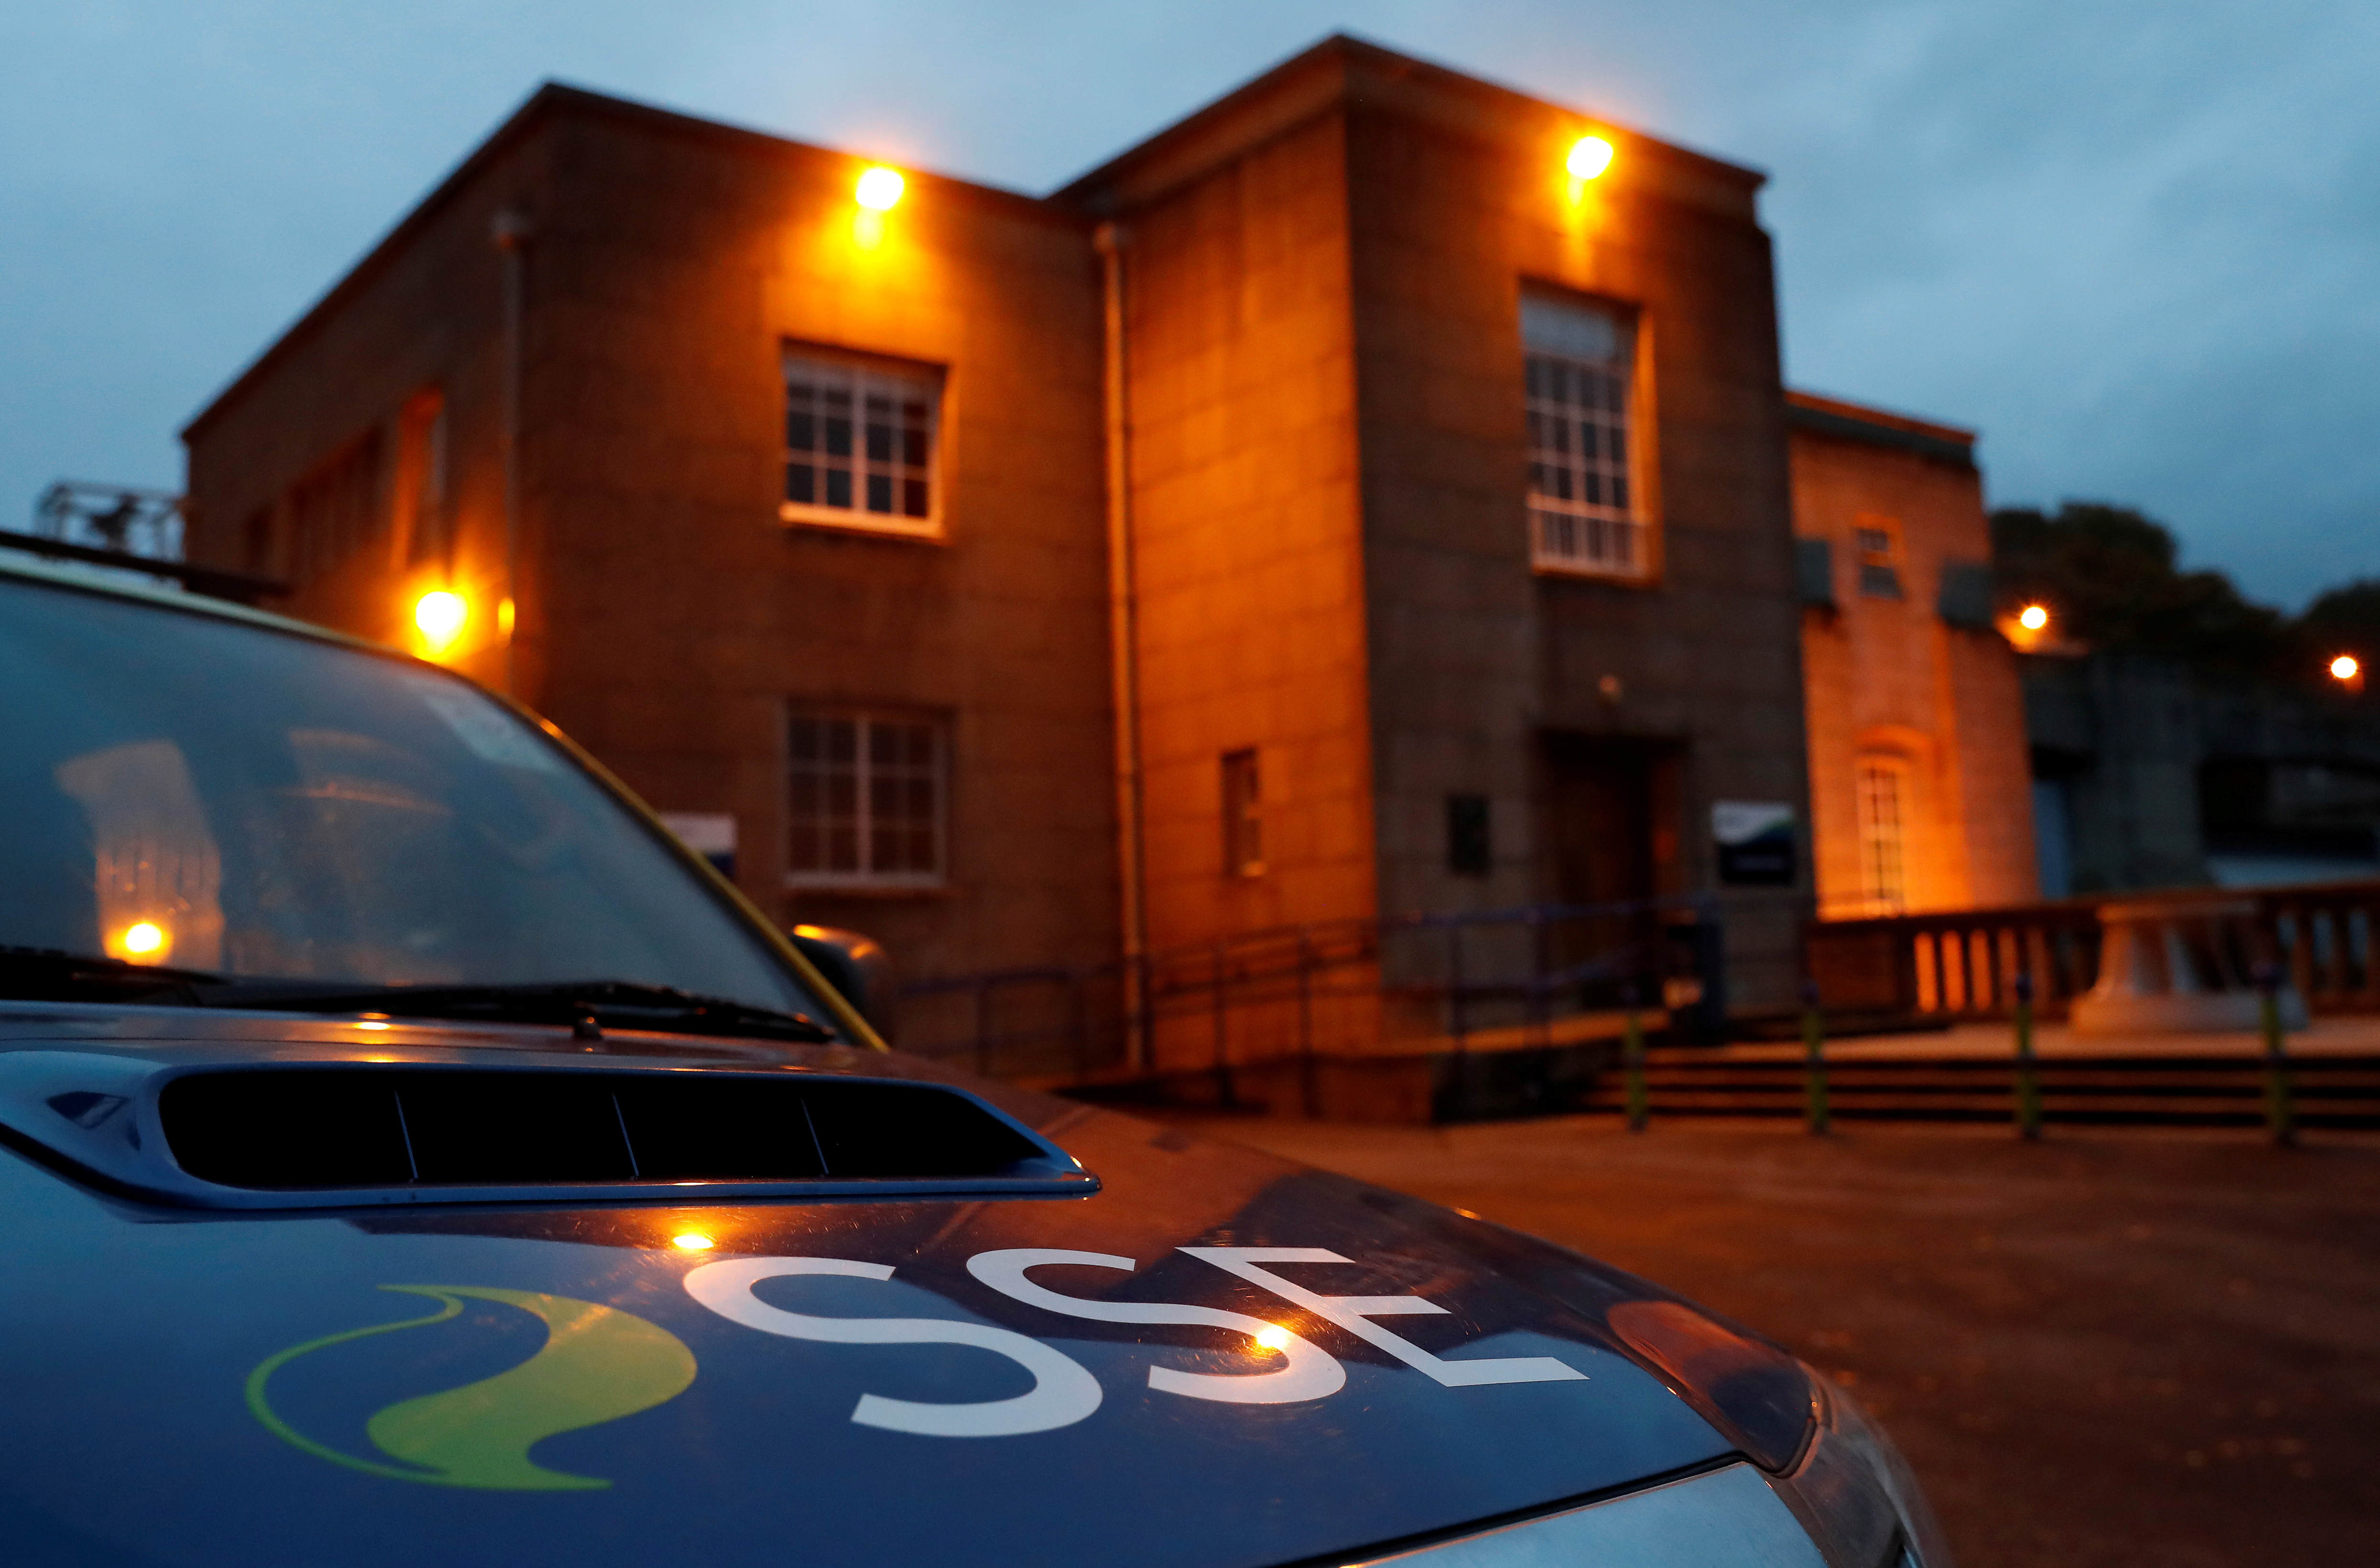 An SSE vehicle is parked outside the Pitlochry Dam hydro electric power station in Pitlochry, Scotland, Britain, November 8, 2017. REUTERS/Russell Cheyne/File Photo